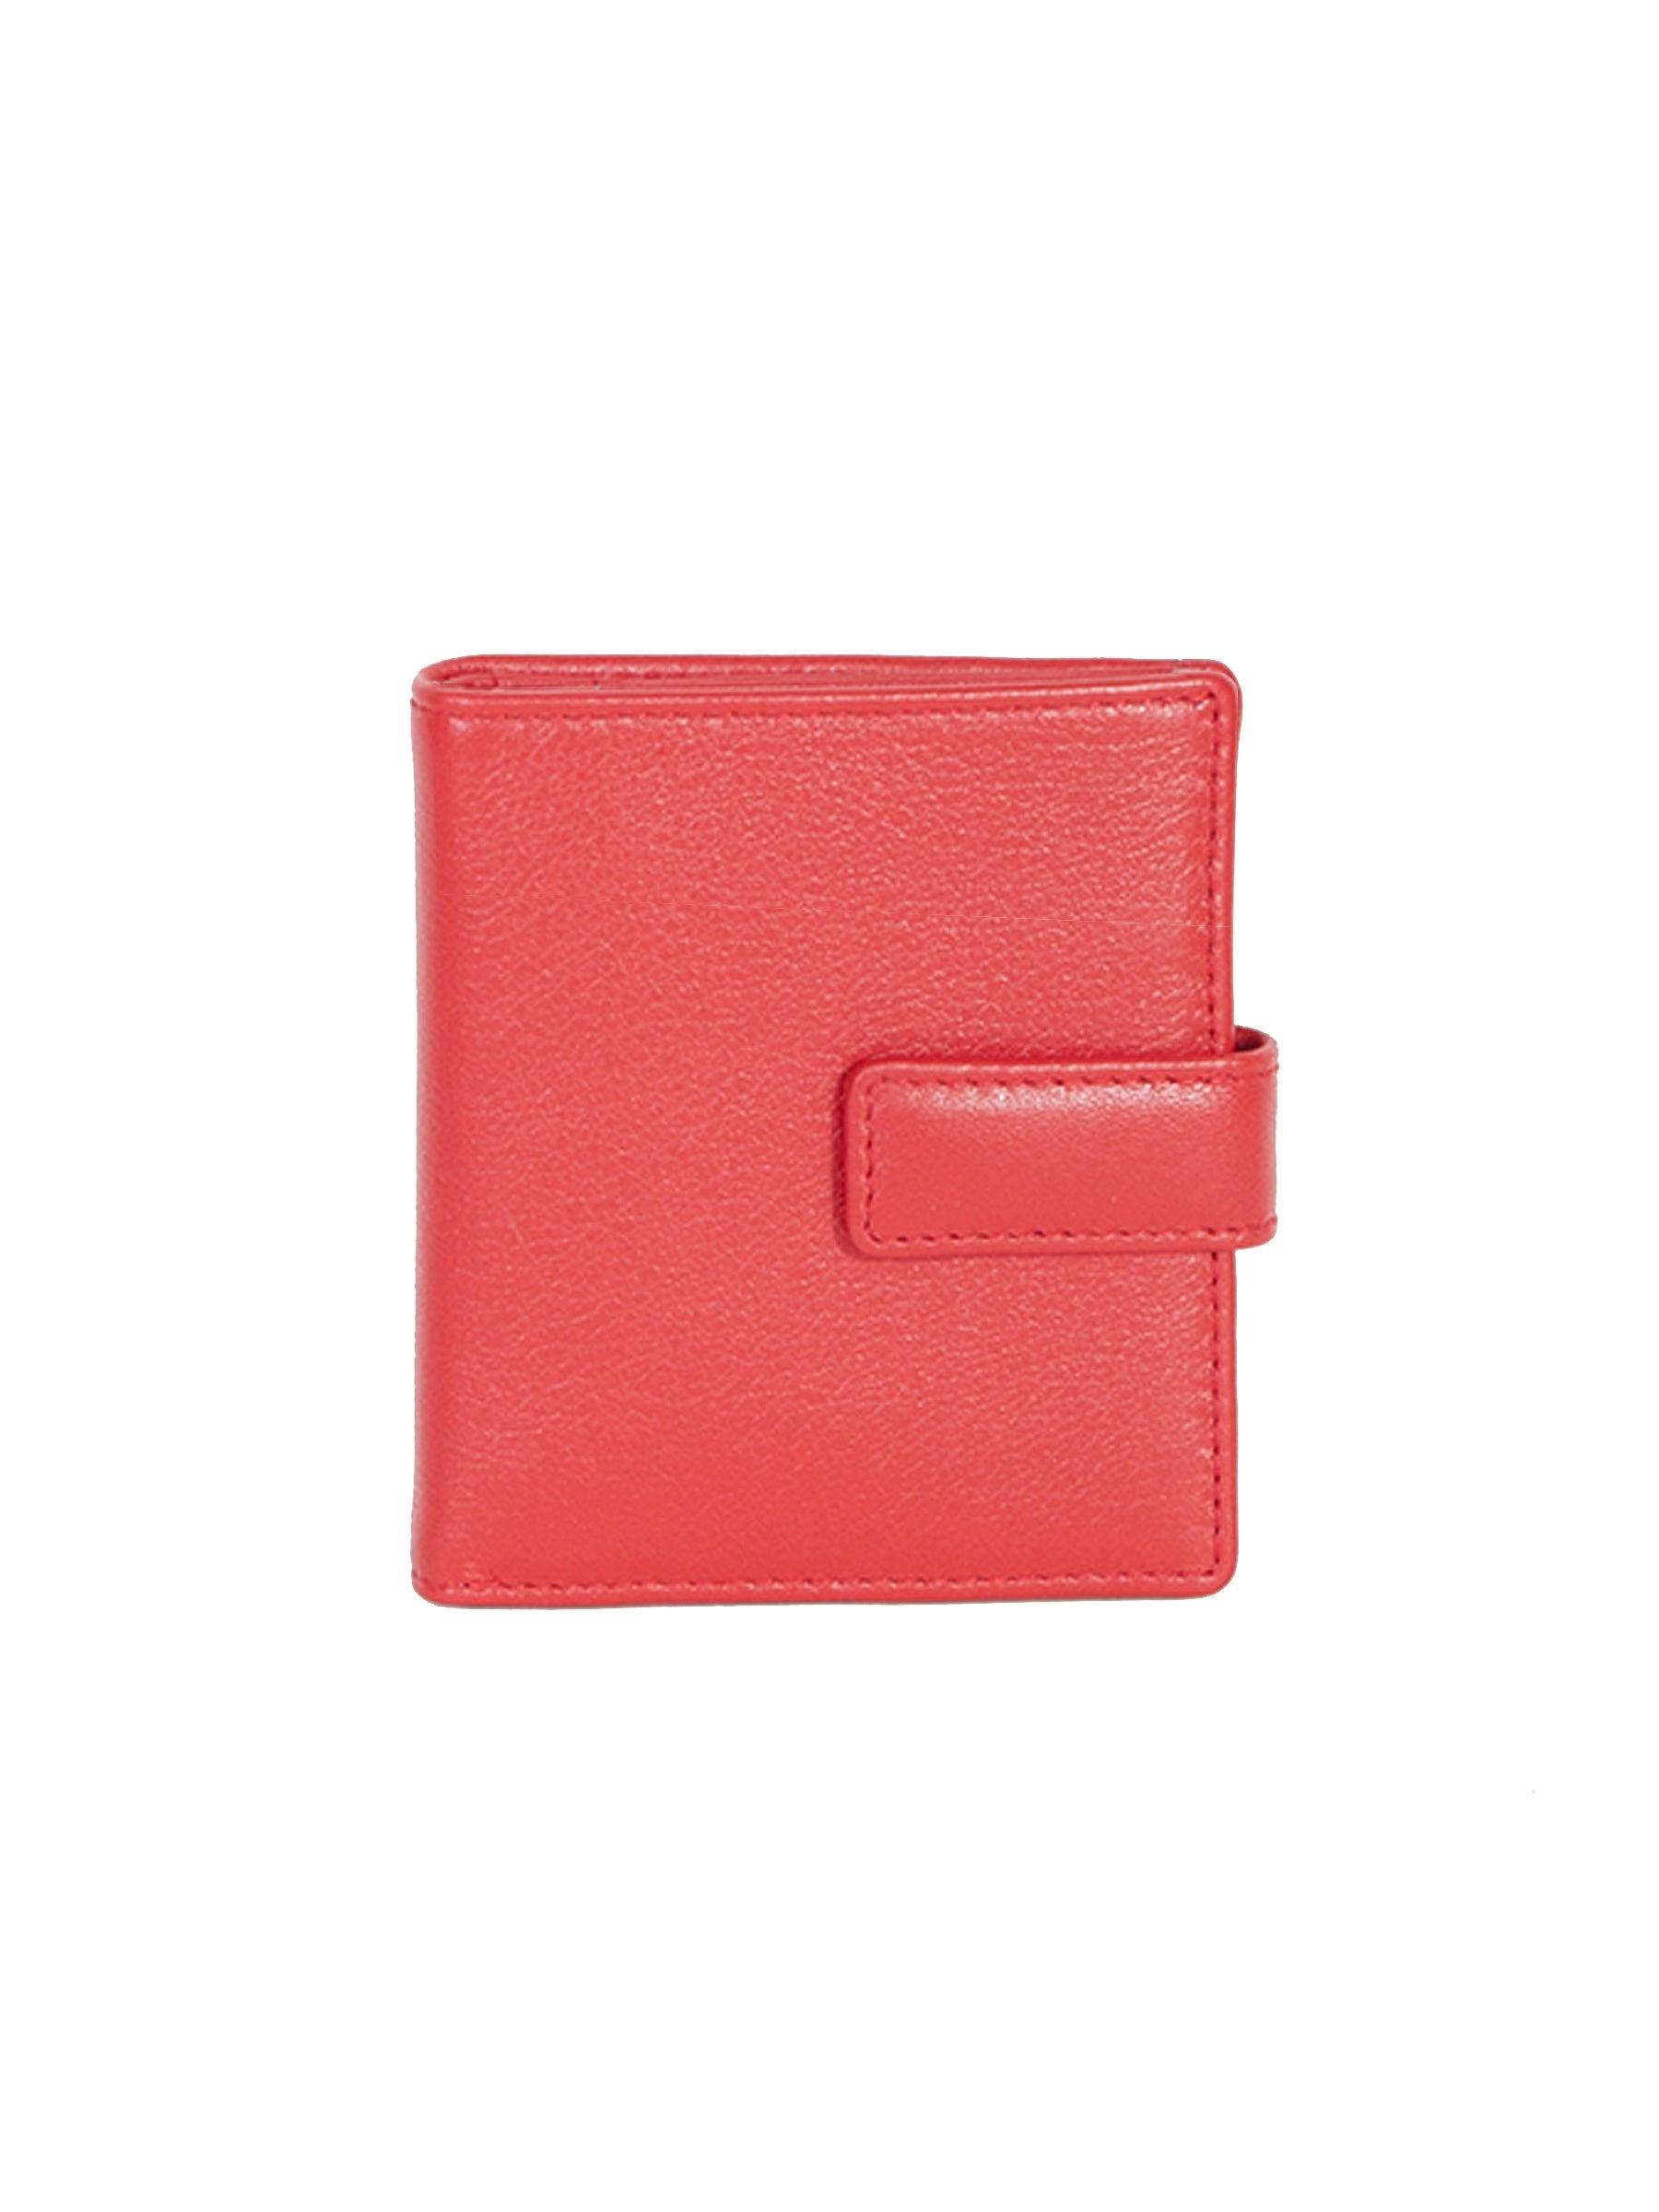 Scully Ladies leather mini wallet with tab closure - Flyclothing LLC